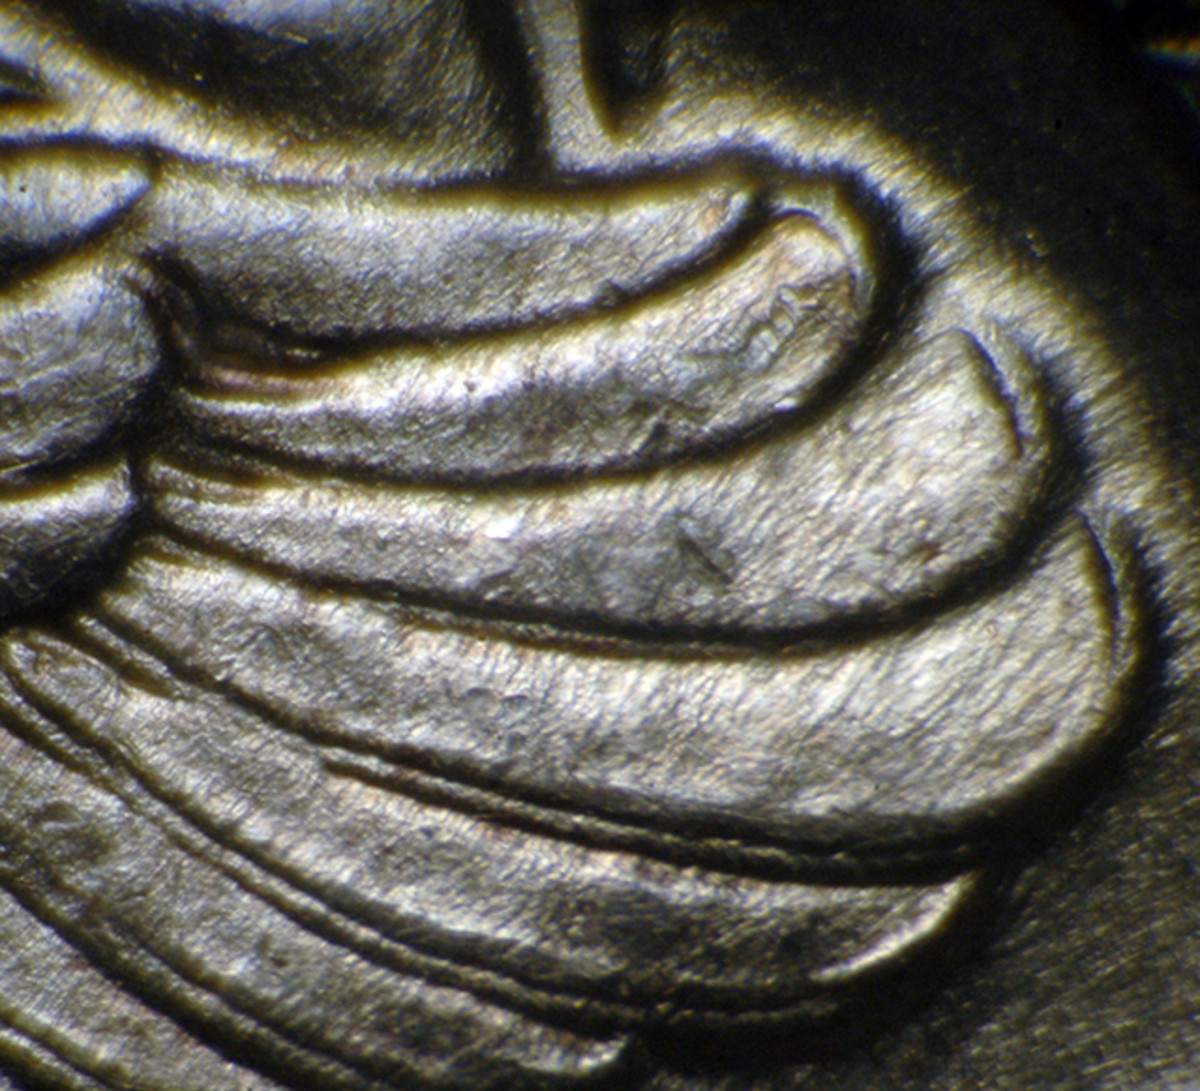 The wing feathers on this Winged Liberty dime shows strong doubling on to the south almost appearing as an outline below each feather.